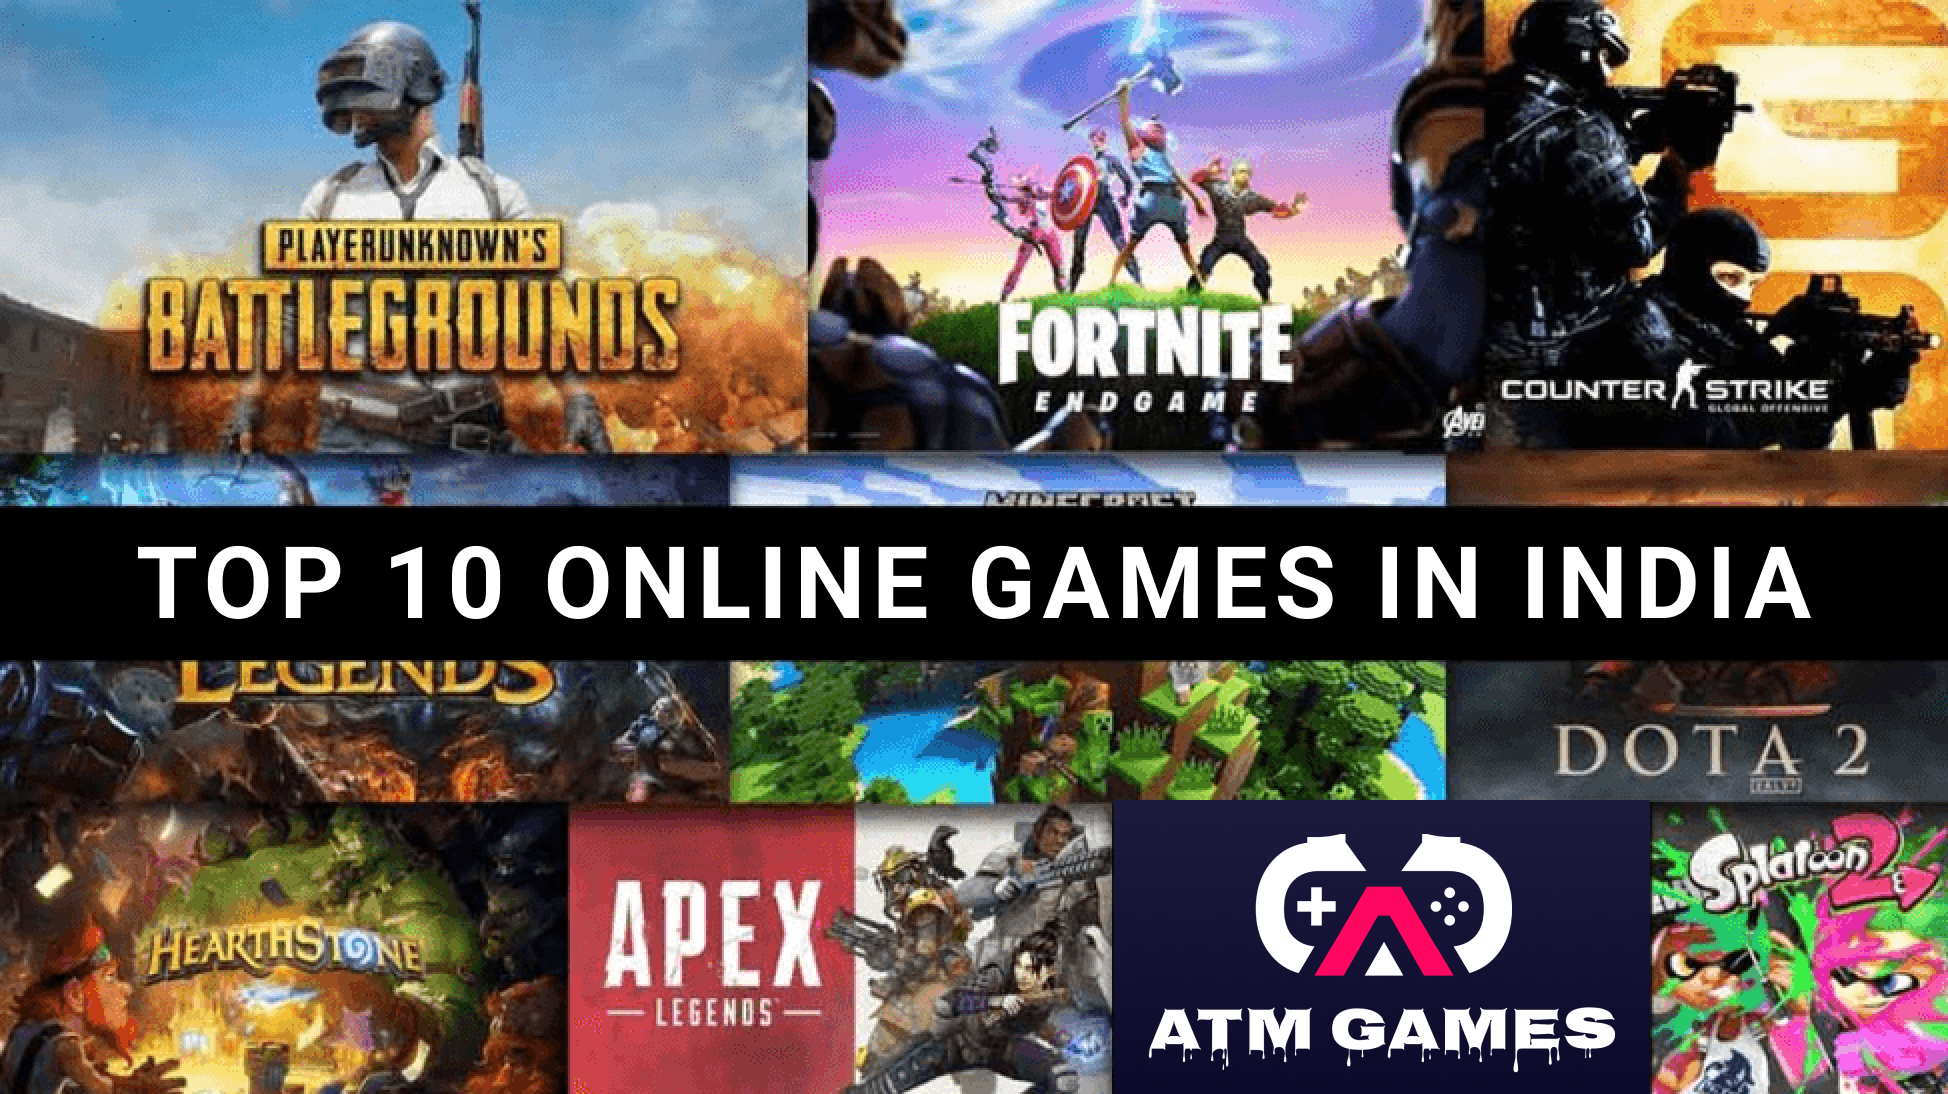 Top 10 Online Games in India: A Game on Atmhtml5games